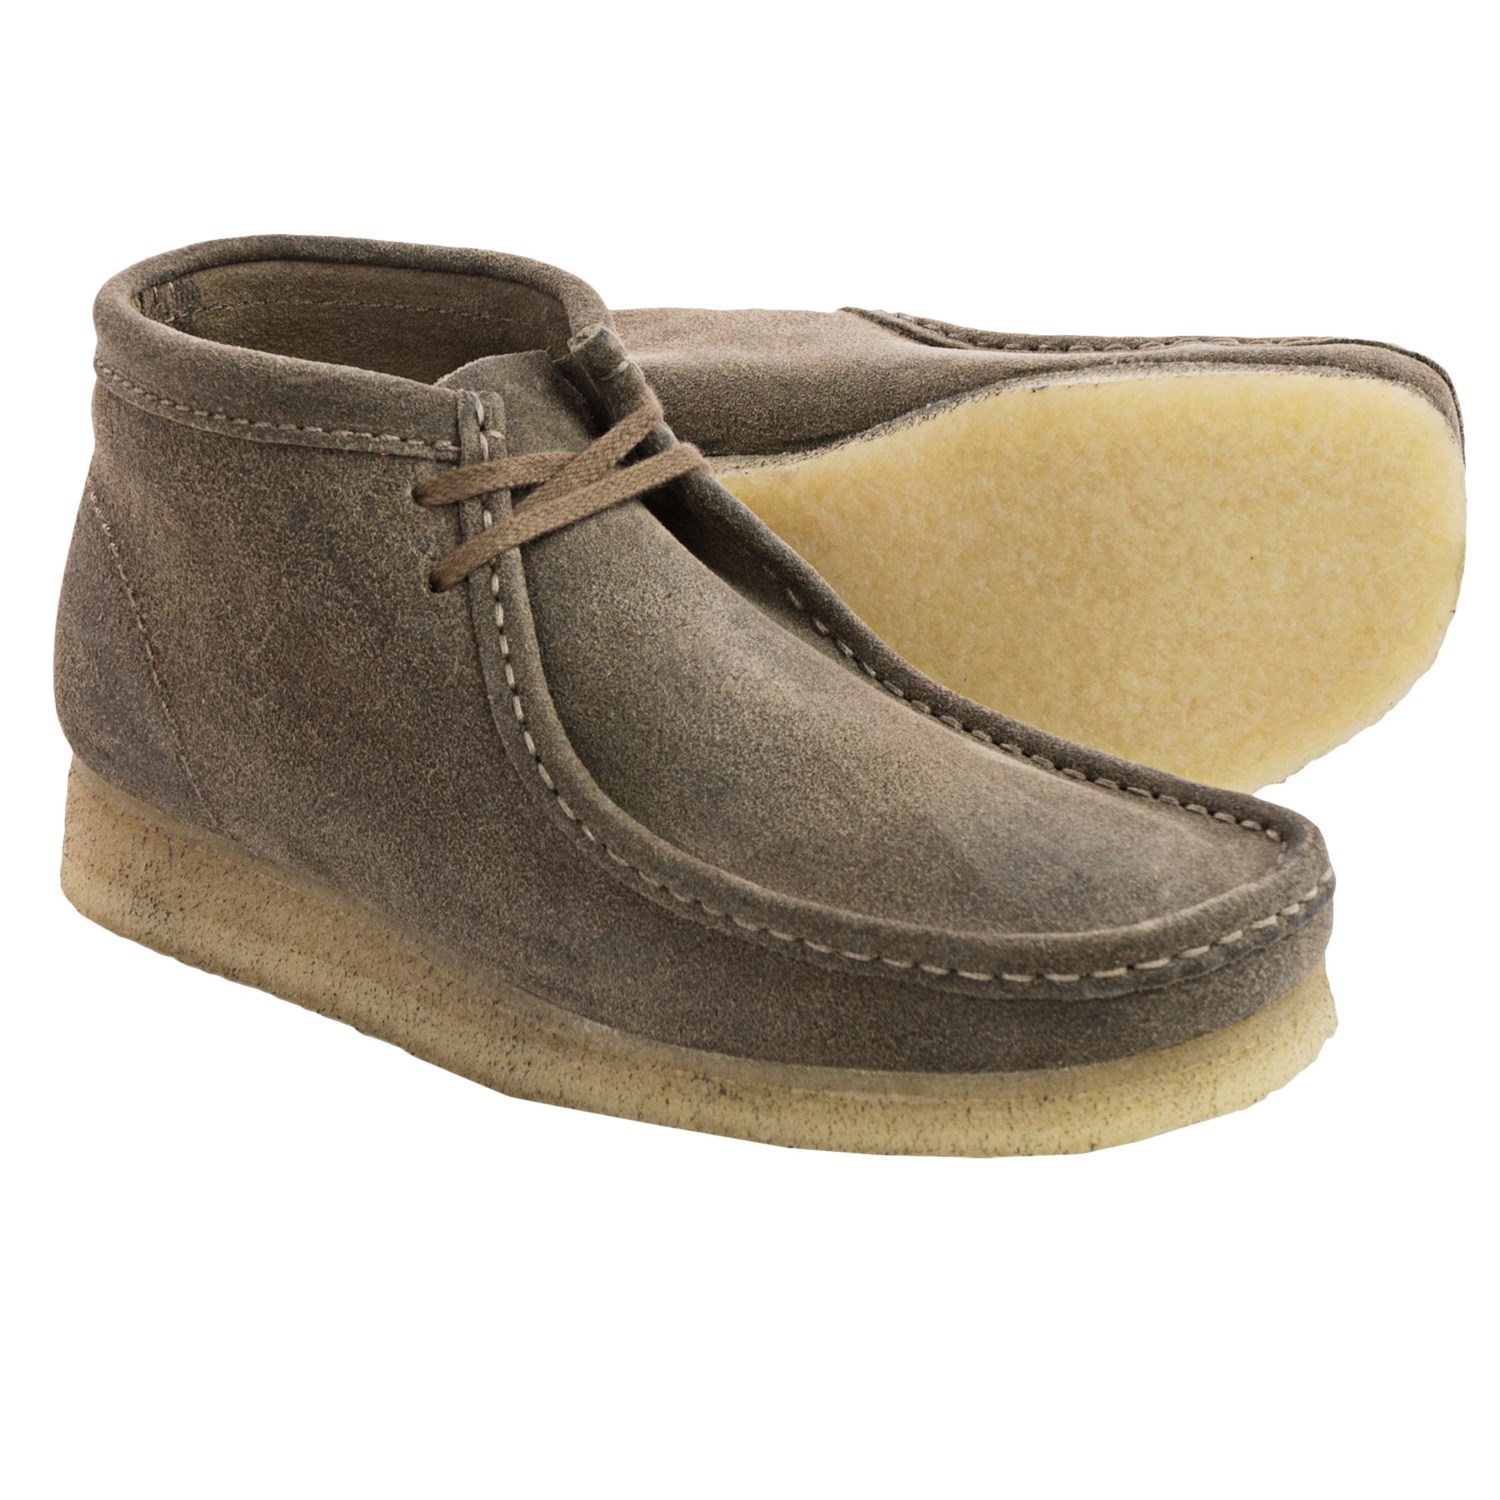 Clarks Wallabee Ankle Boots (For Men) - Save 60%